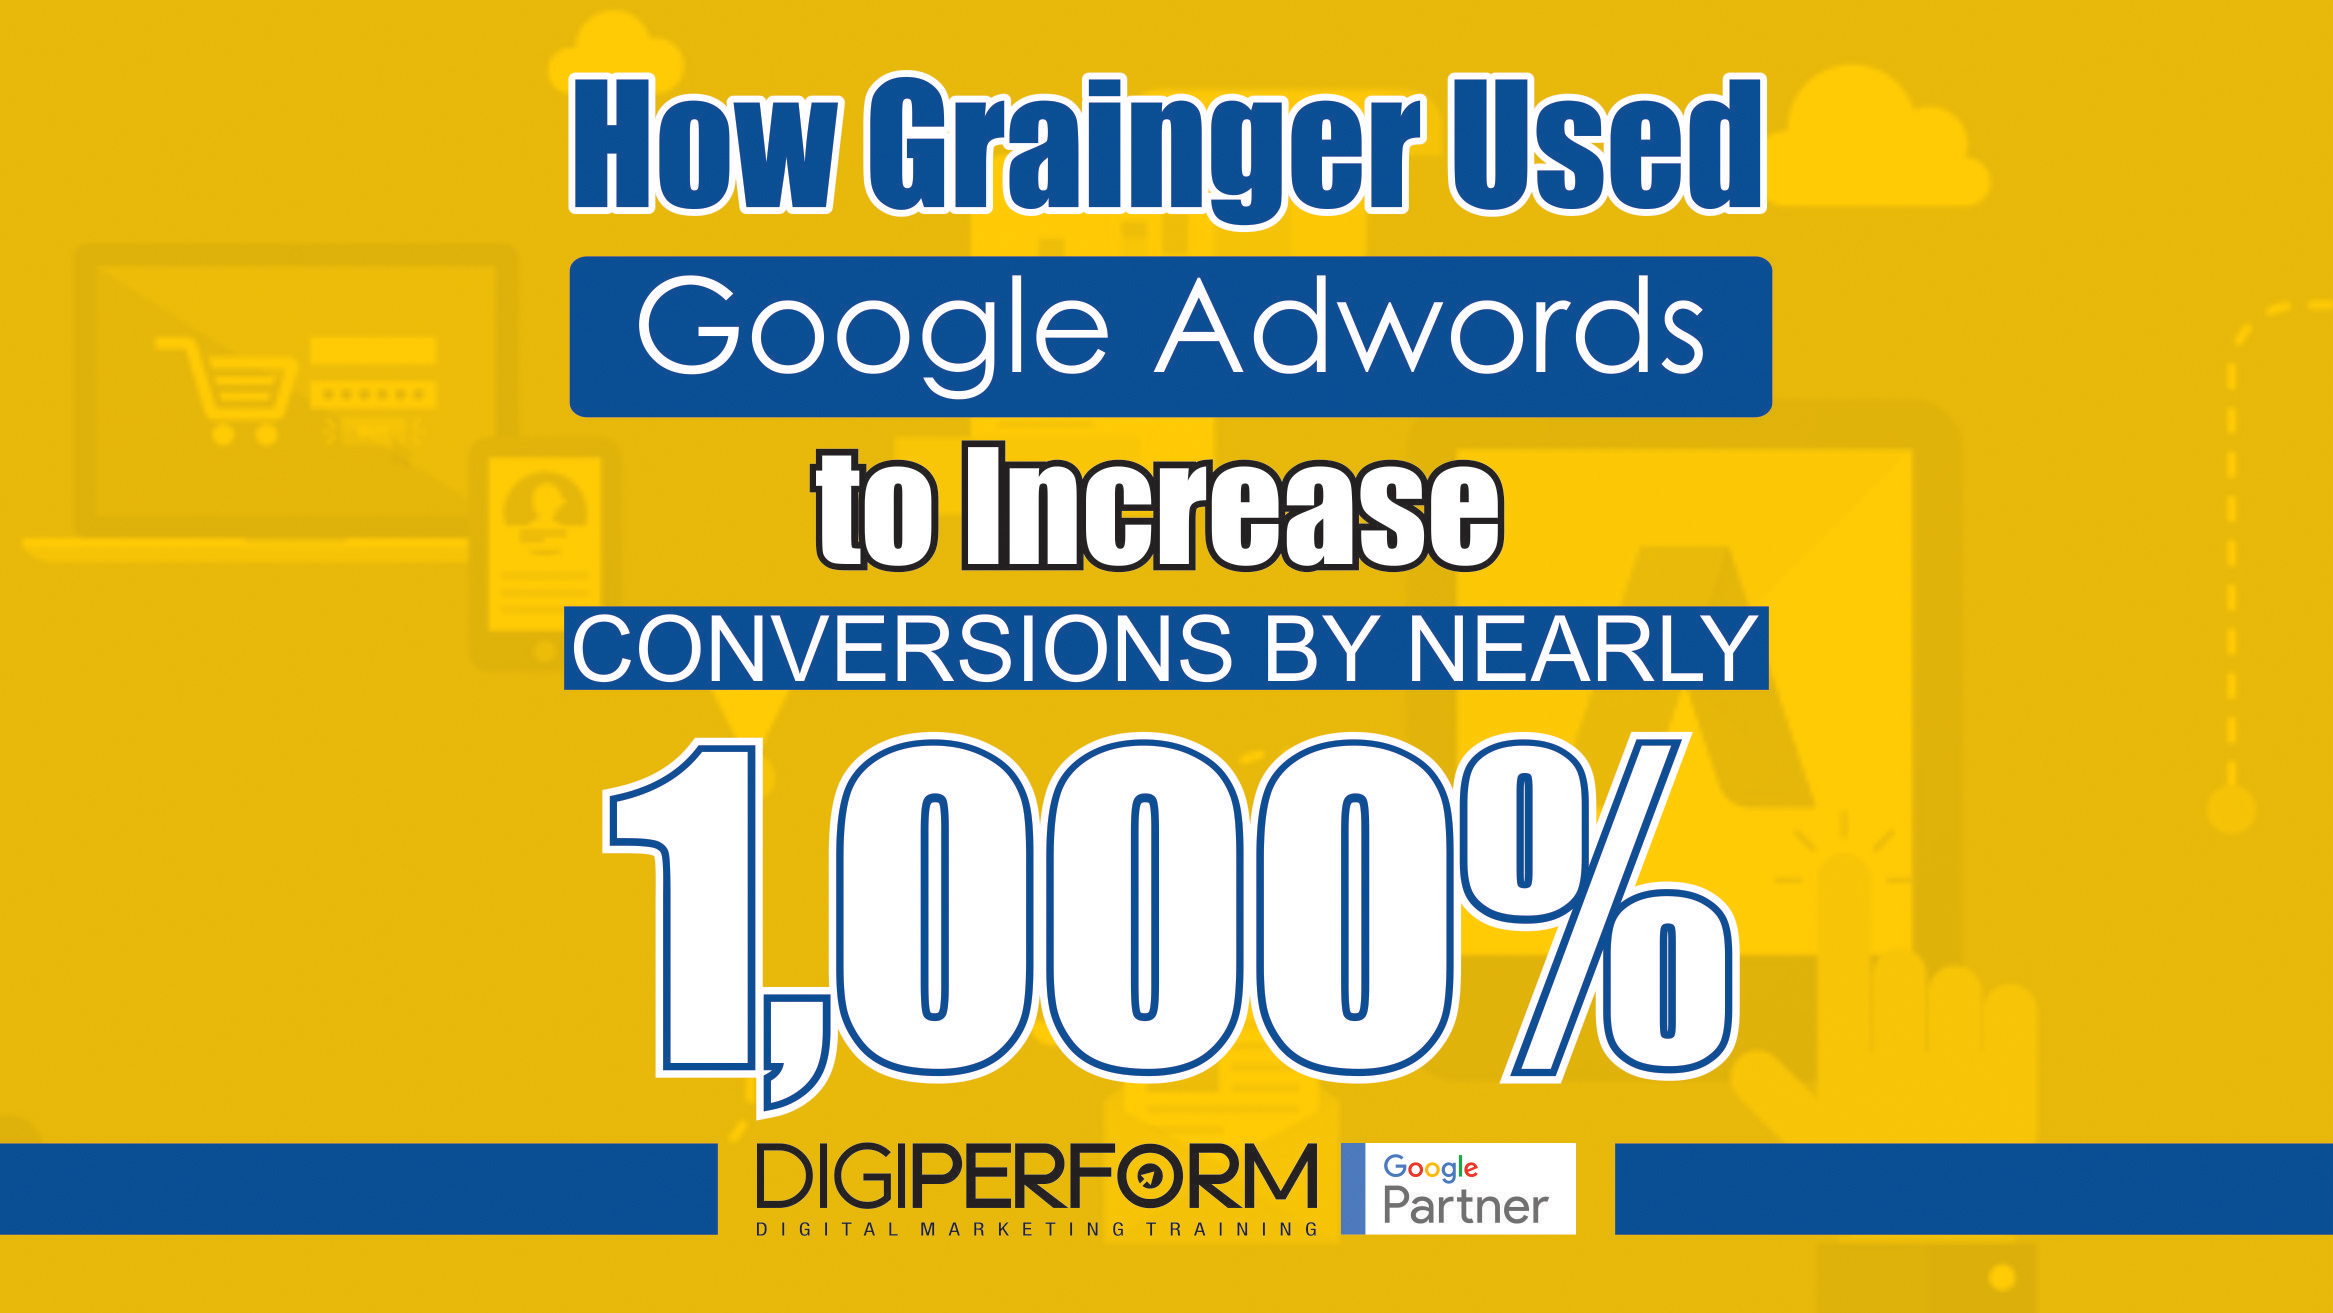 How Grainger Used Google Adwords to increase conversions by nearly 1,000%